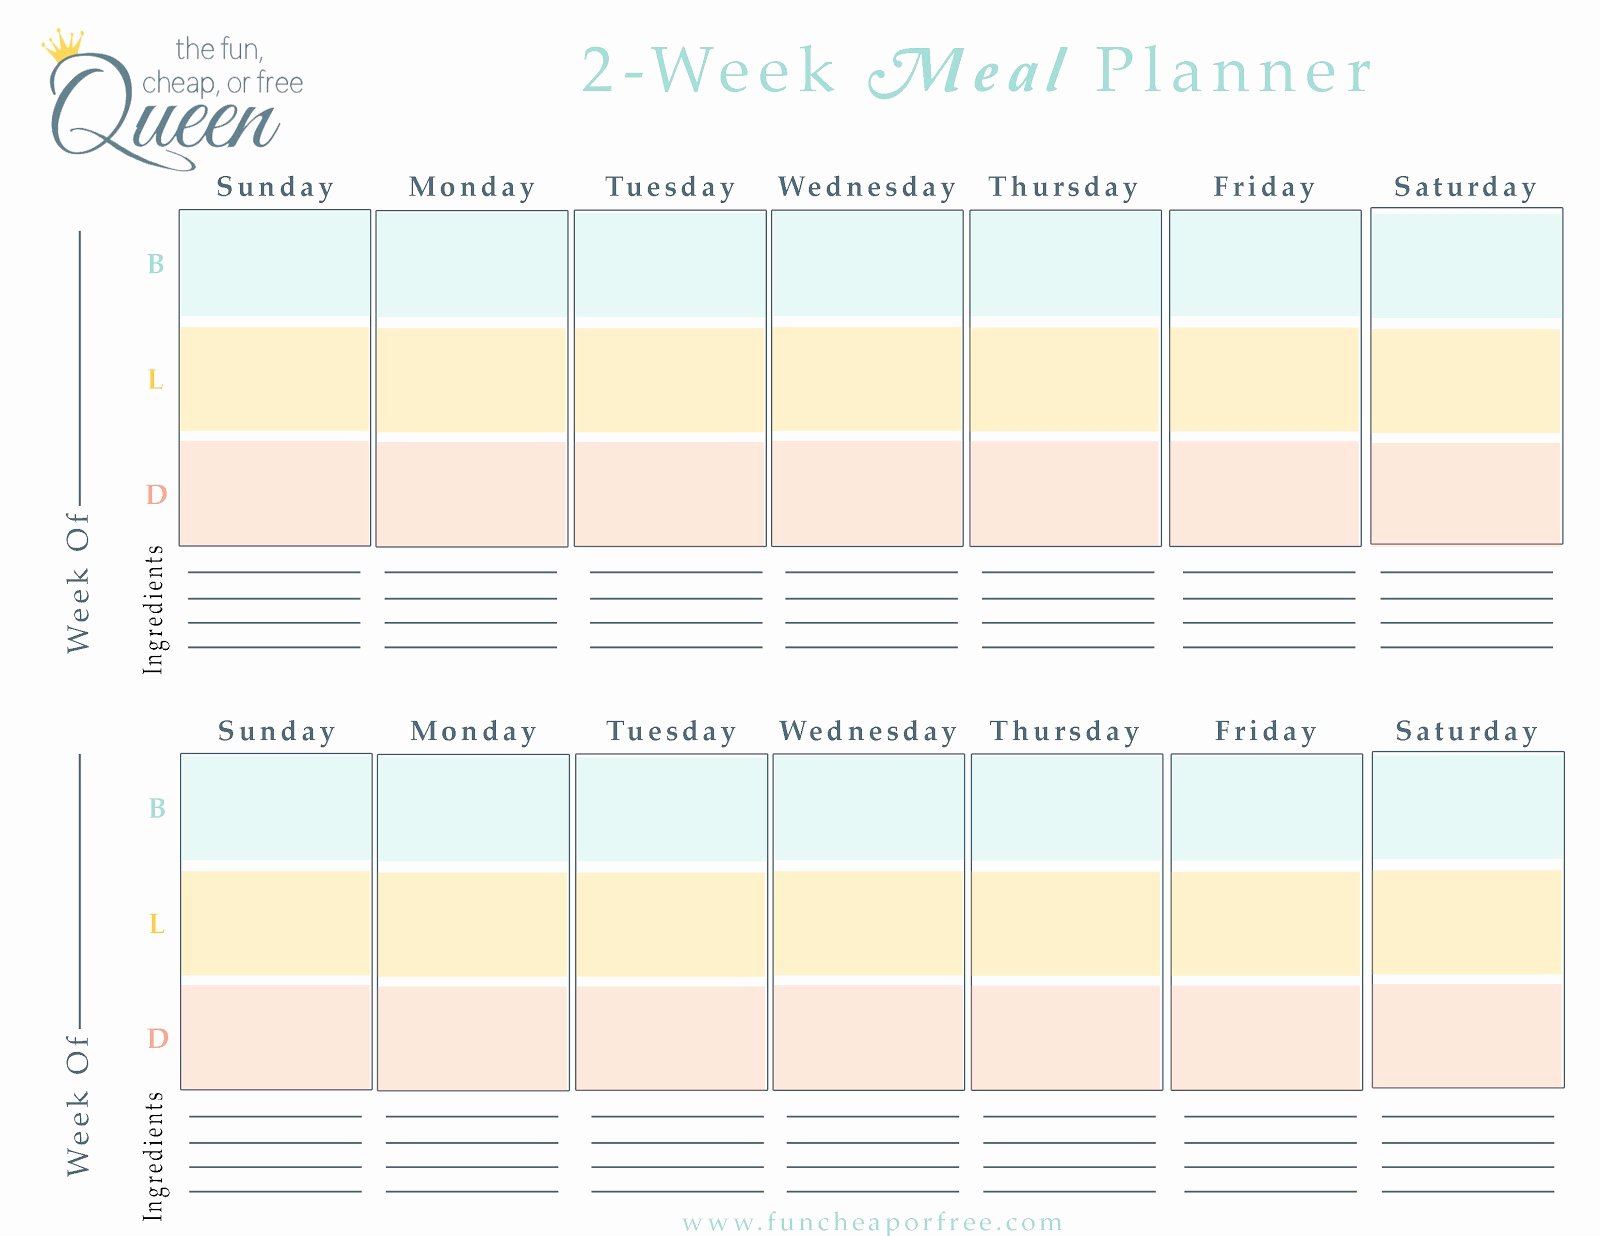 Free Meal Plan Templates New Easy Meal Plan Structure with Free Printables Fun Cheap